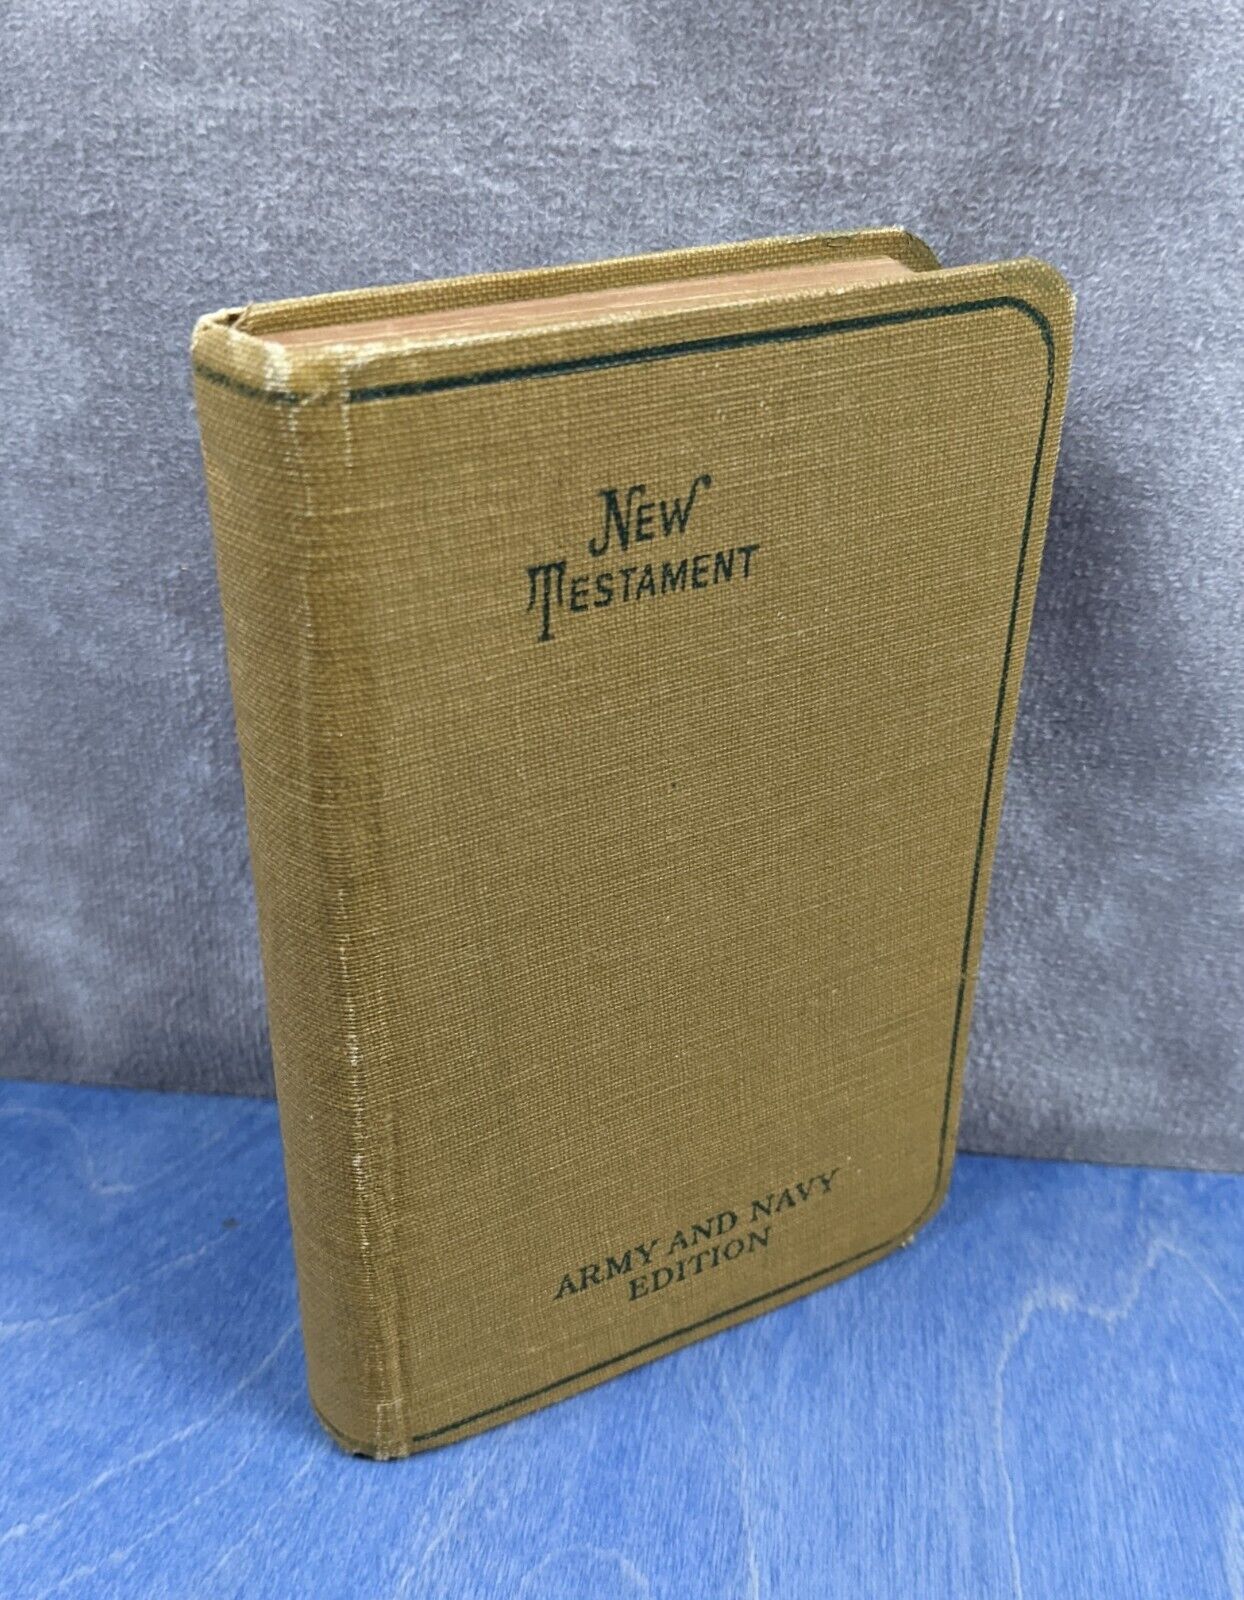 Vintage 1917 Pocket Bible WW1 Army Navy Edition New Testament Soldiers Rolla ND